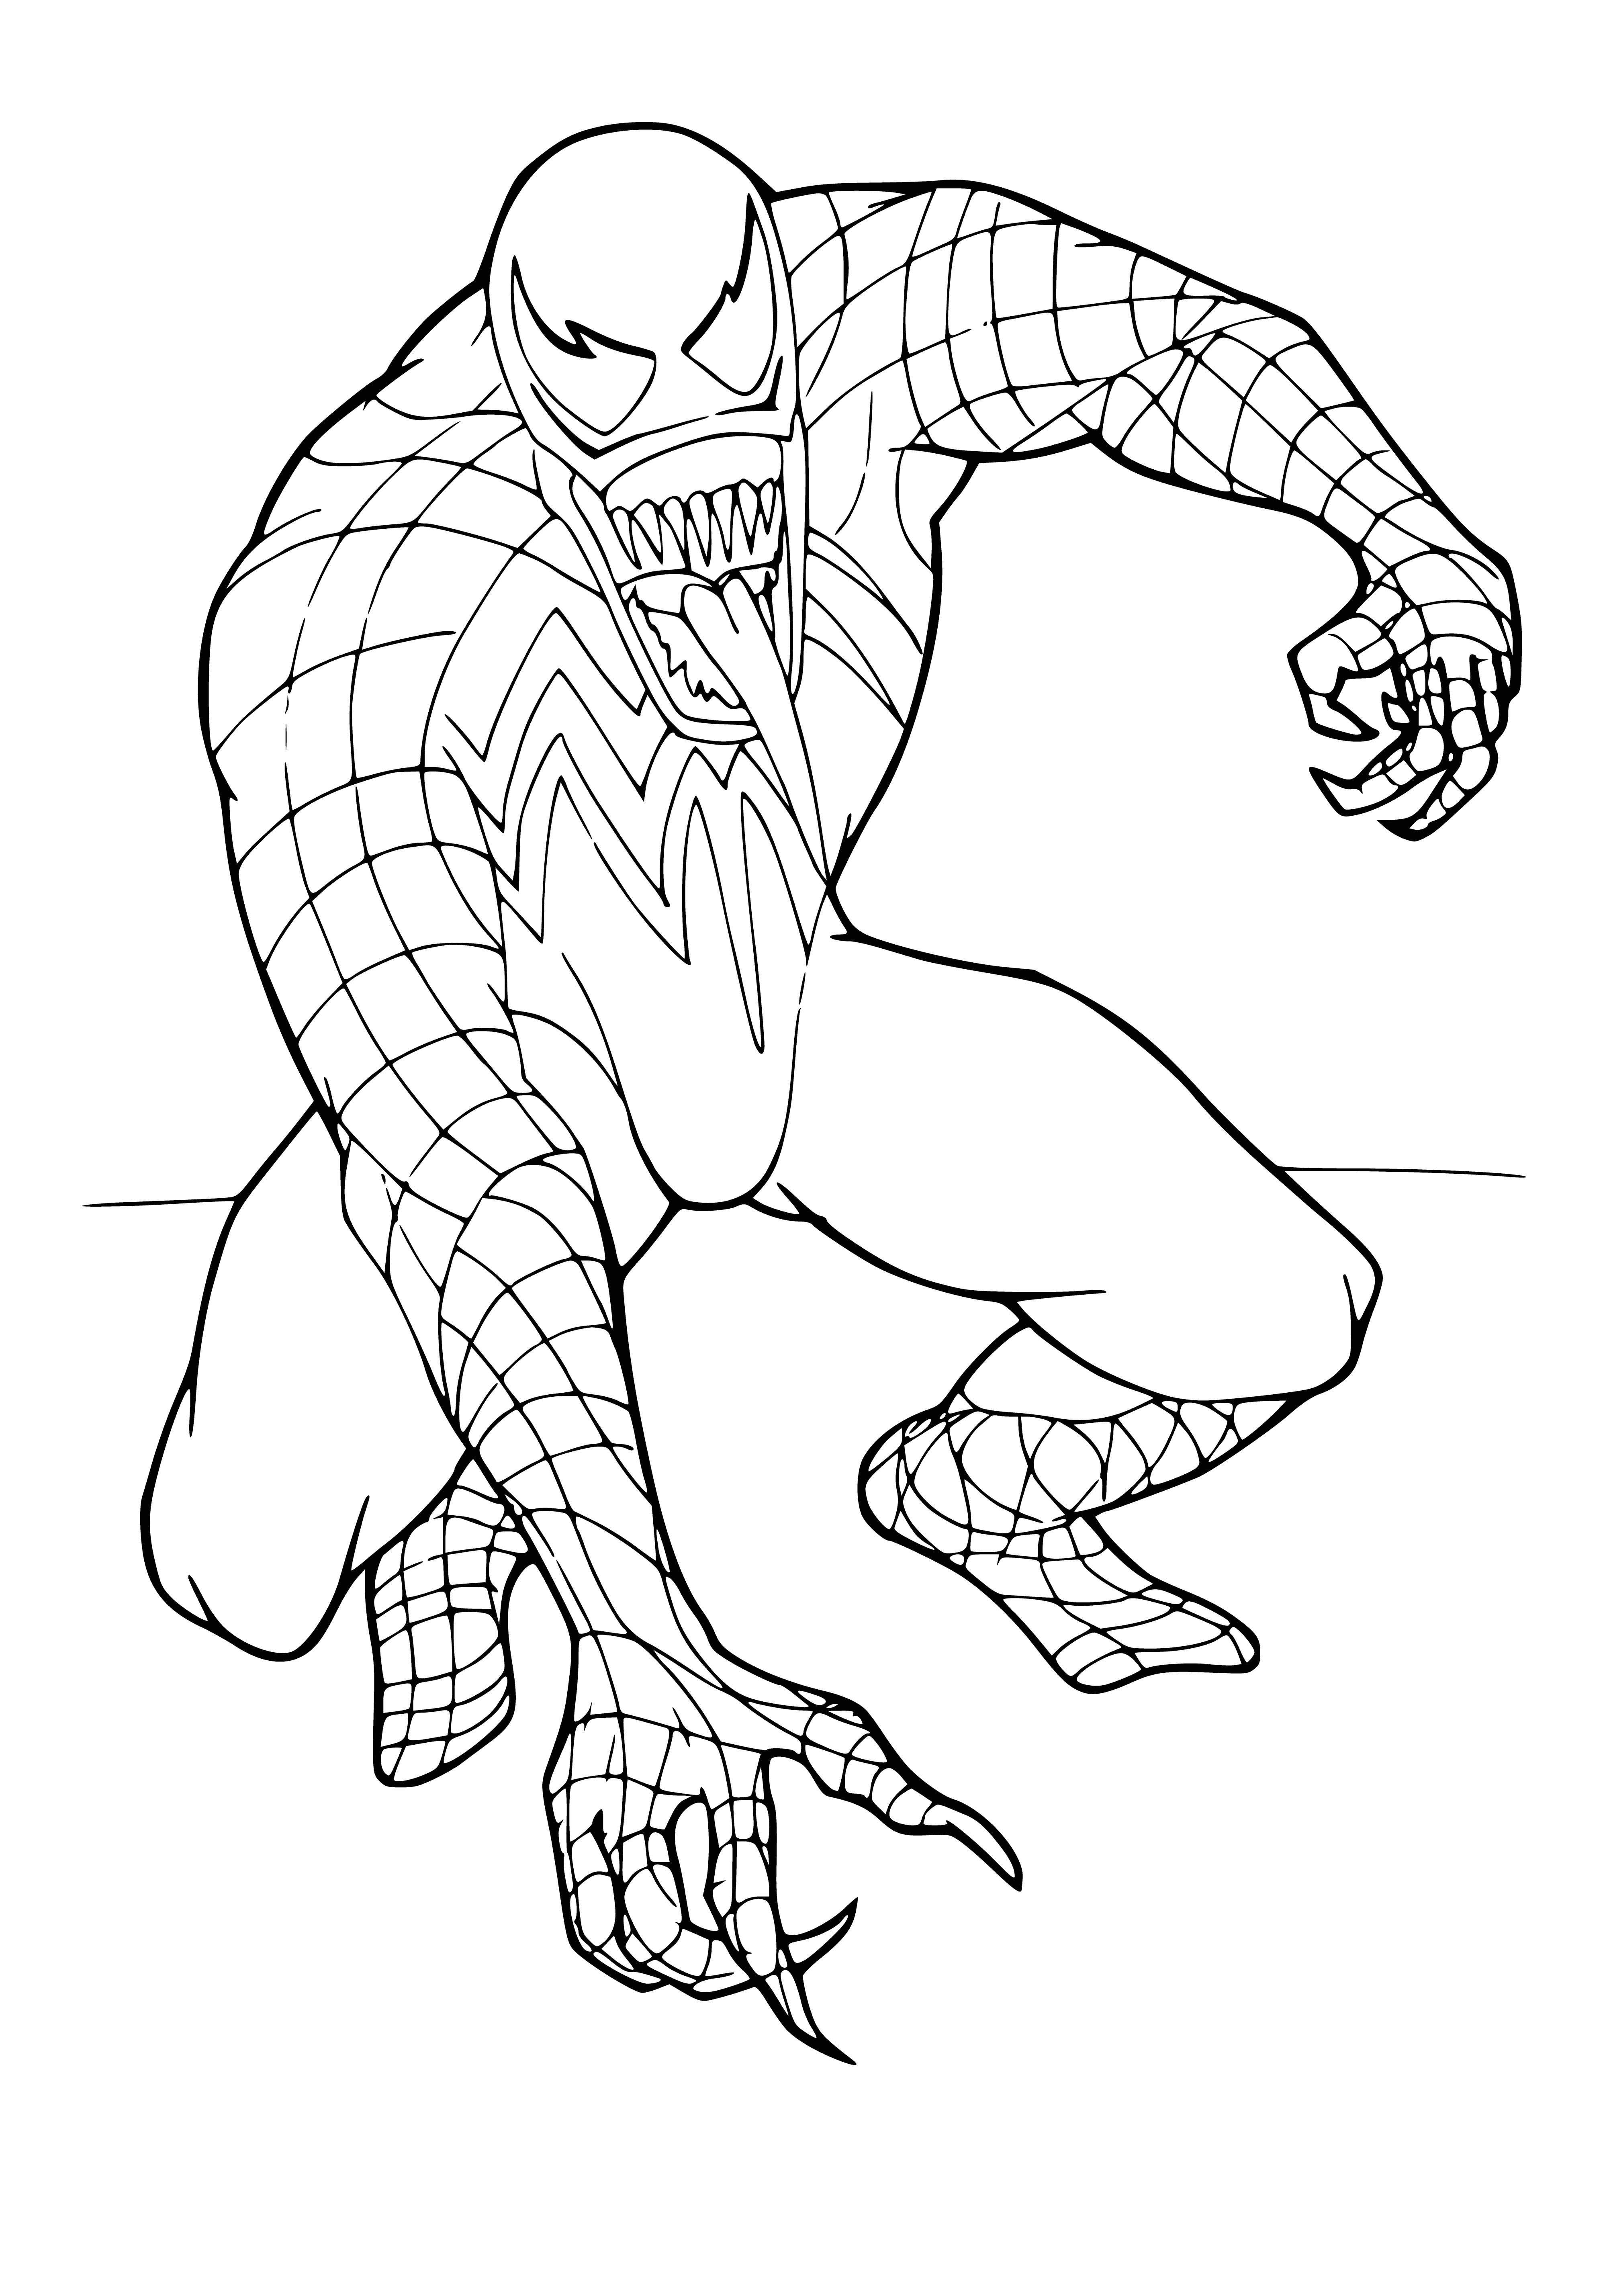 coloring page: SpiderMan vs Venom - Superhero agility confronts ferocious strength; Spidey must outwit a powerful enemy.